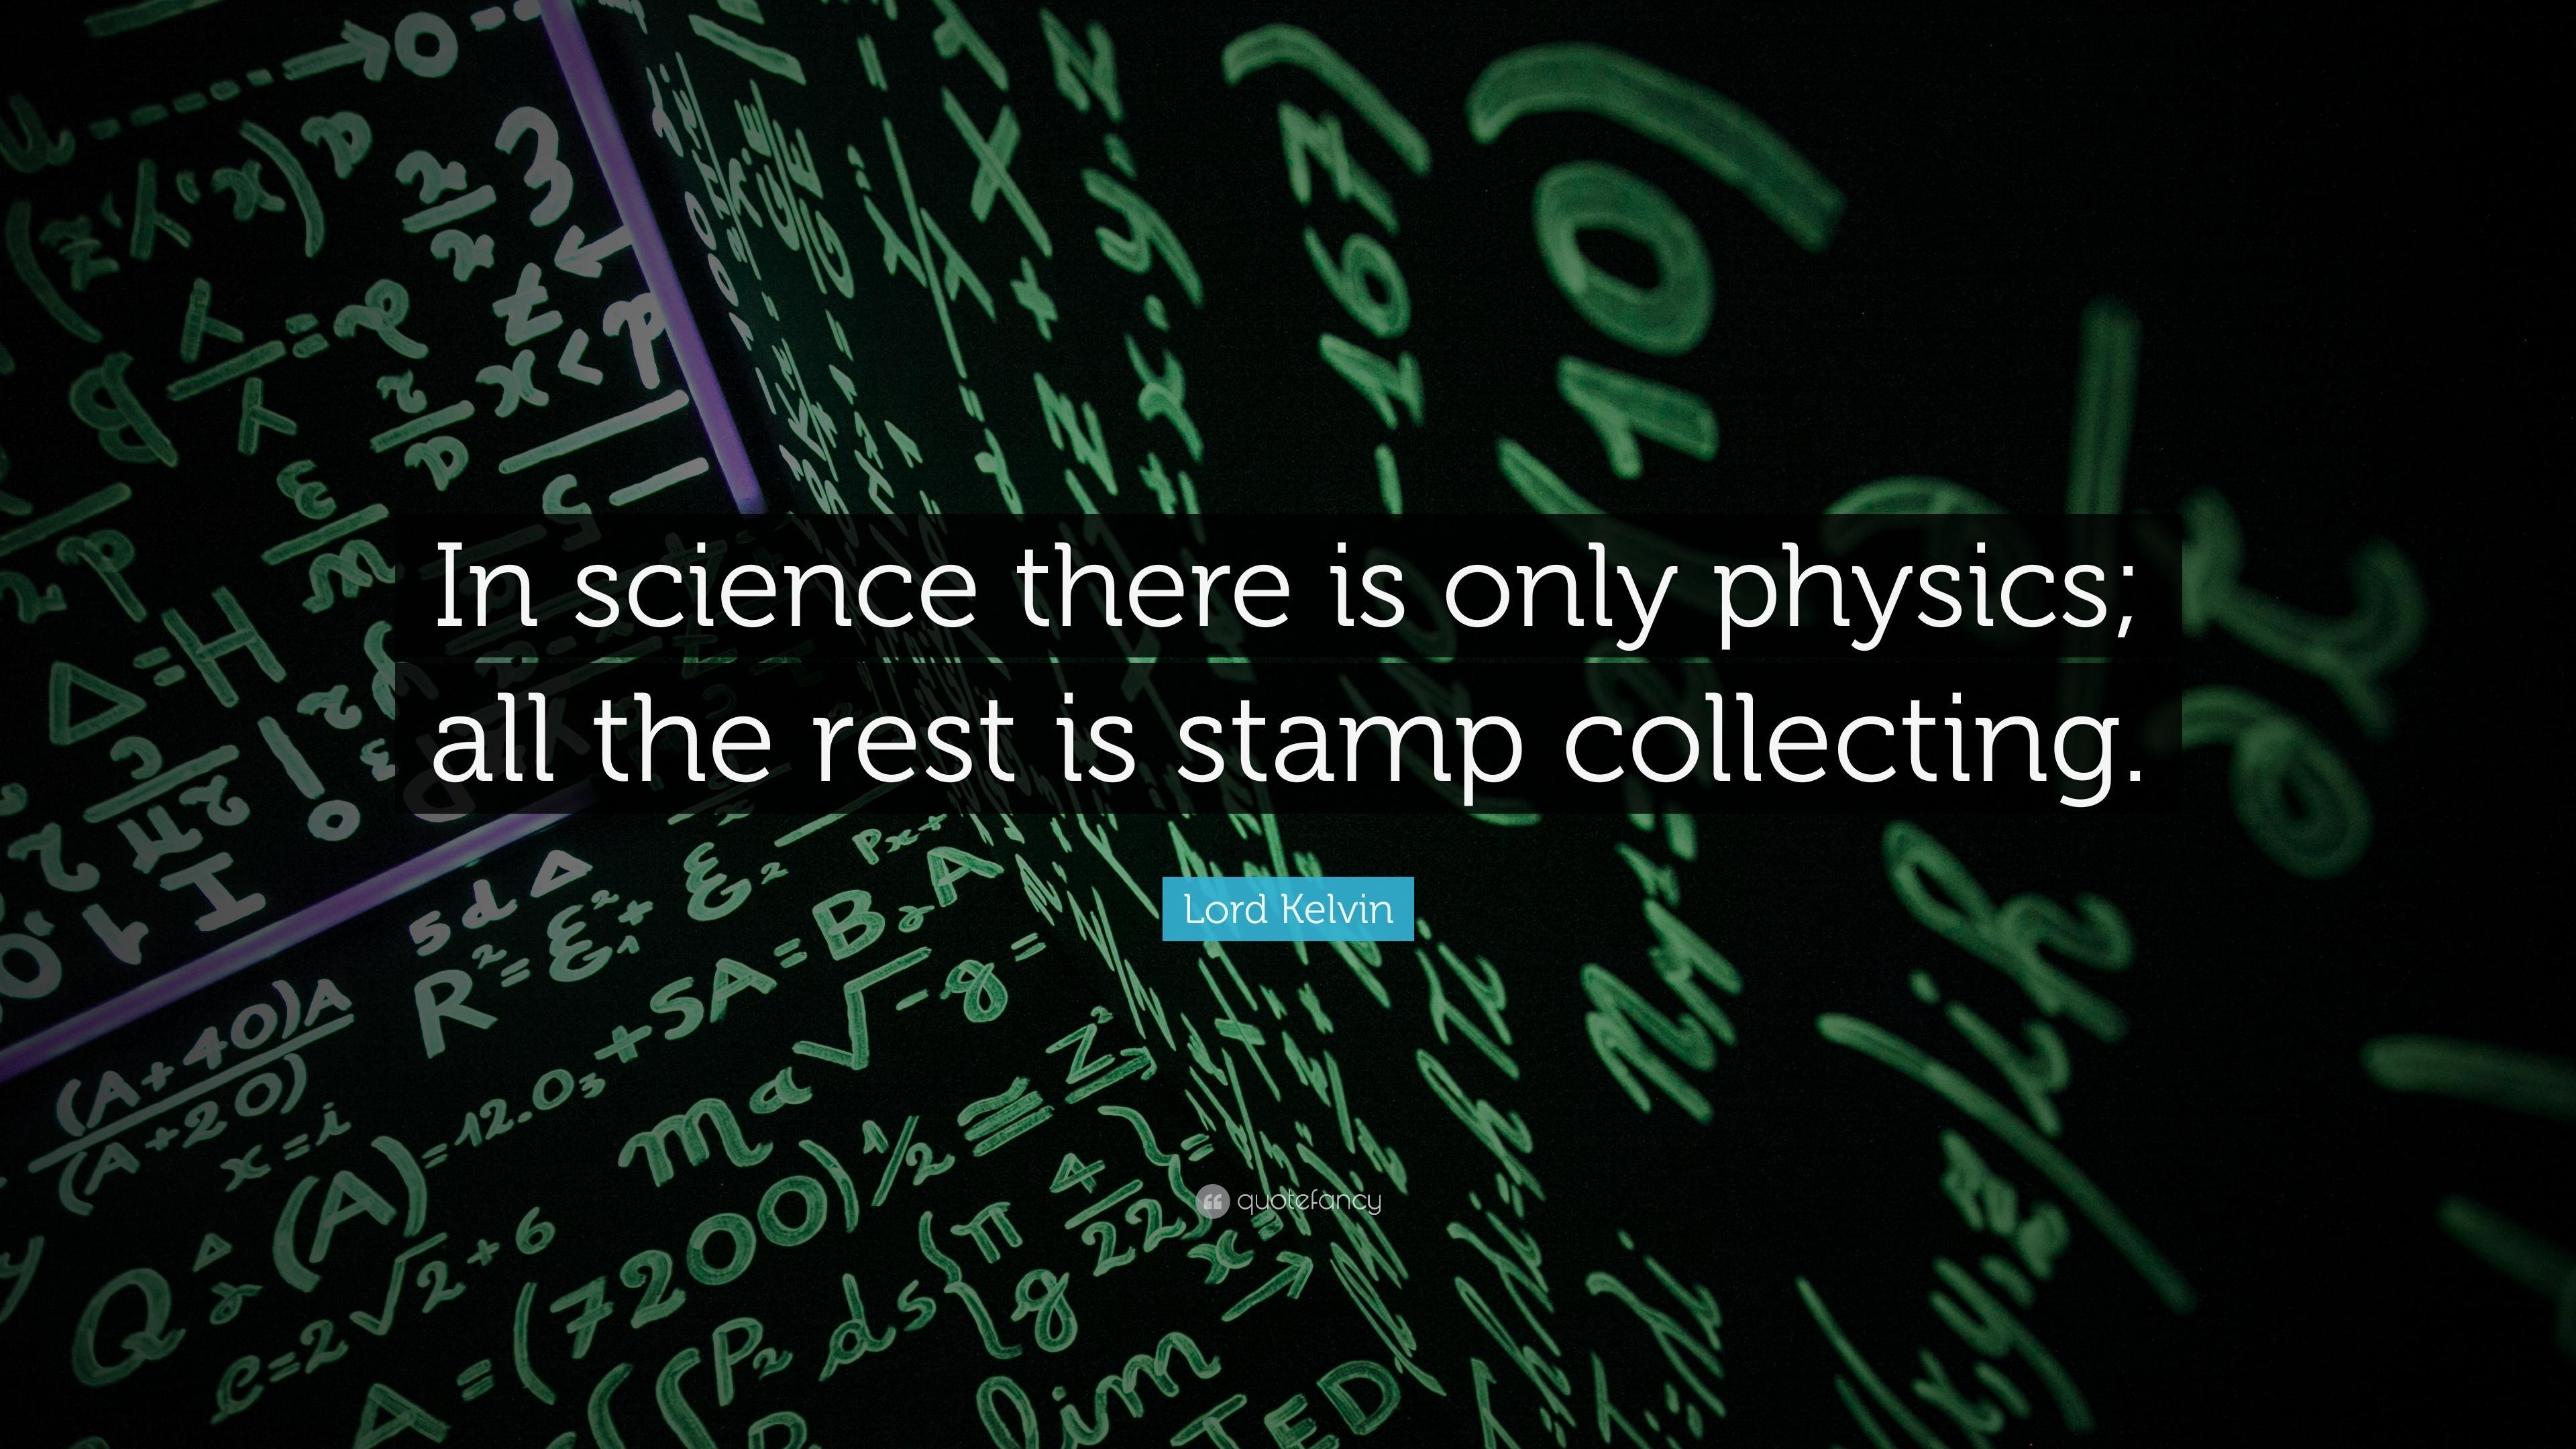 Lord Kelvin Quote: “In science there is only physics; all the rest is stamp collecting.”